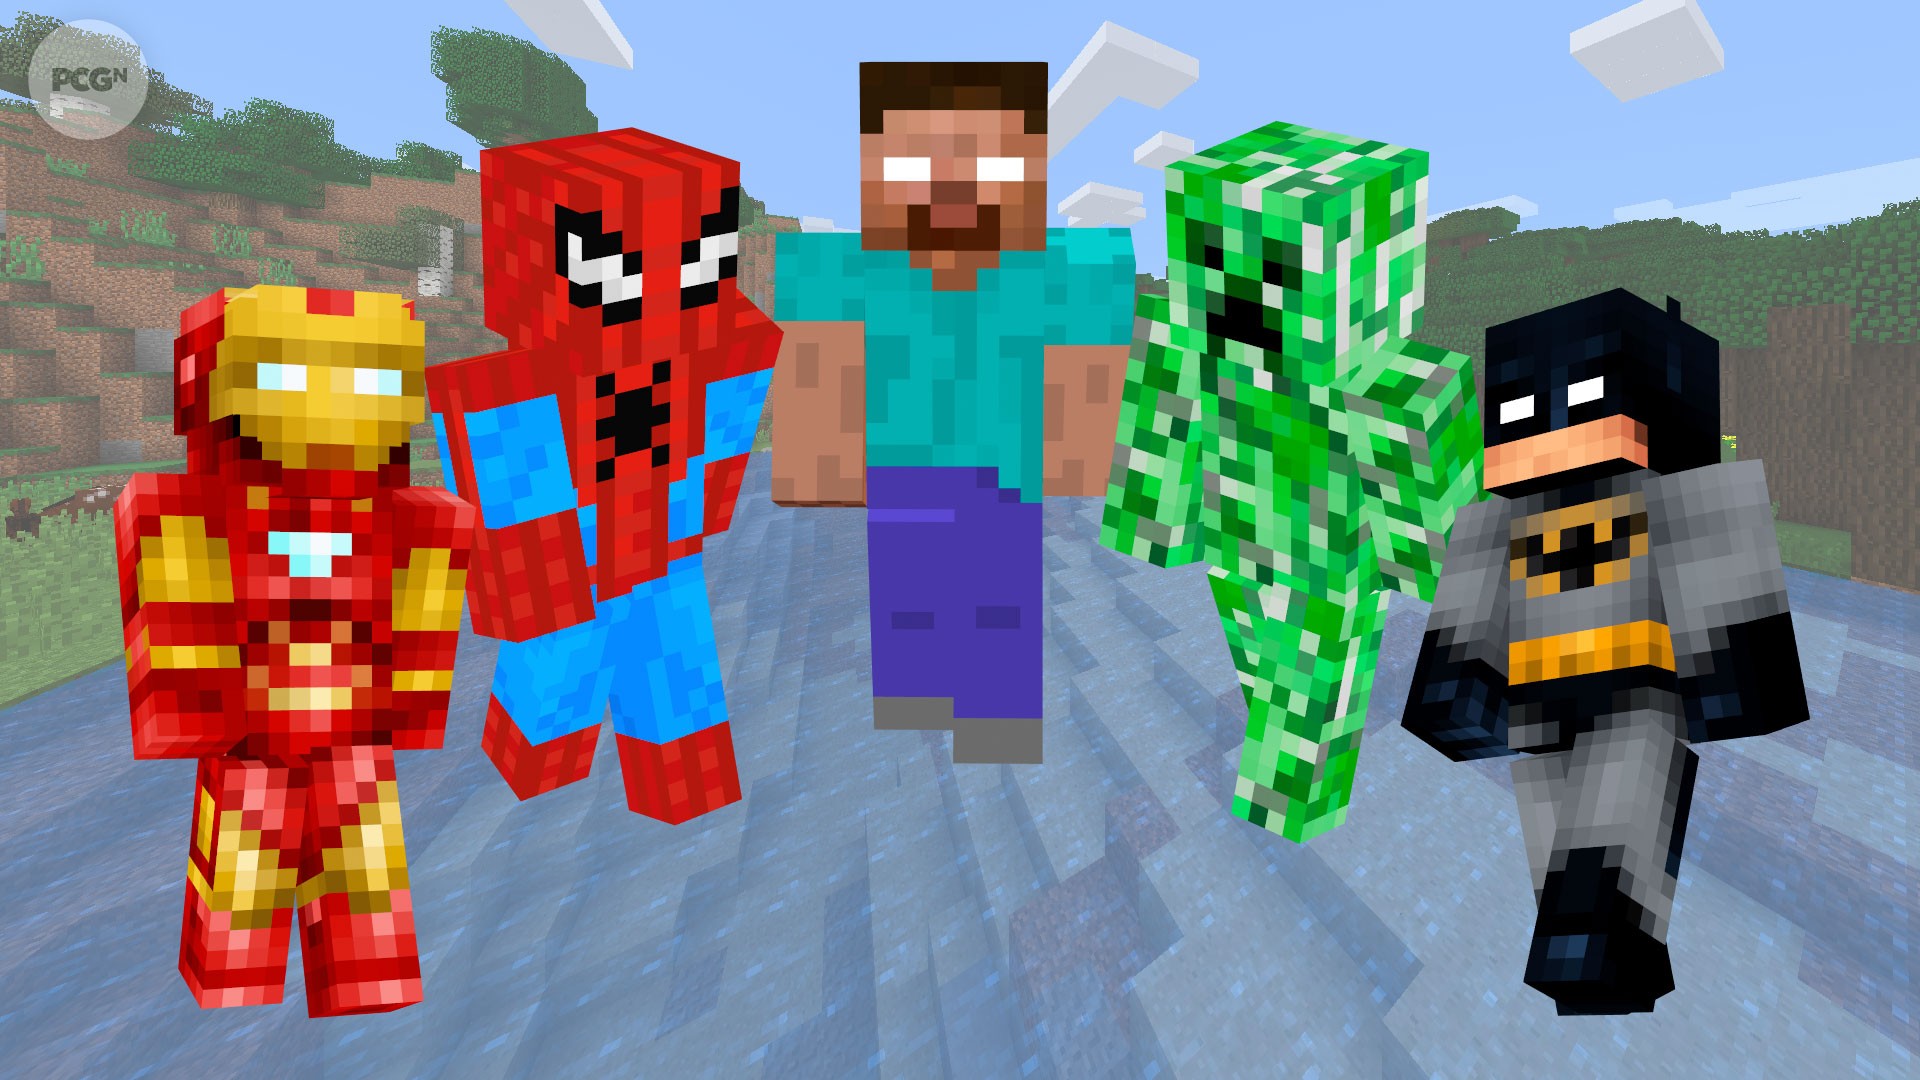 Cool Minecraft skins to download for your avatar